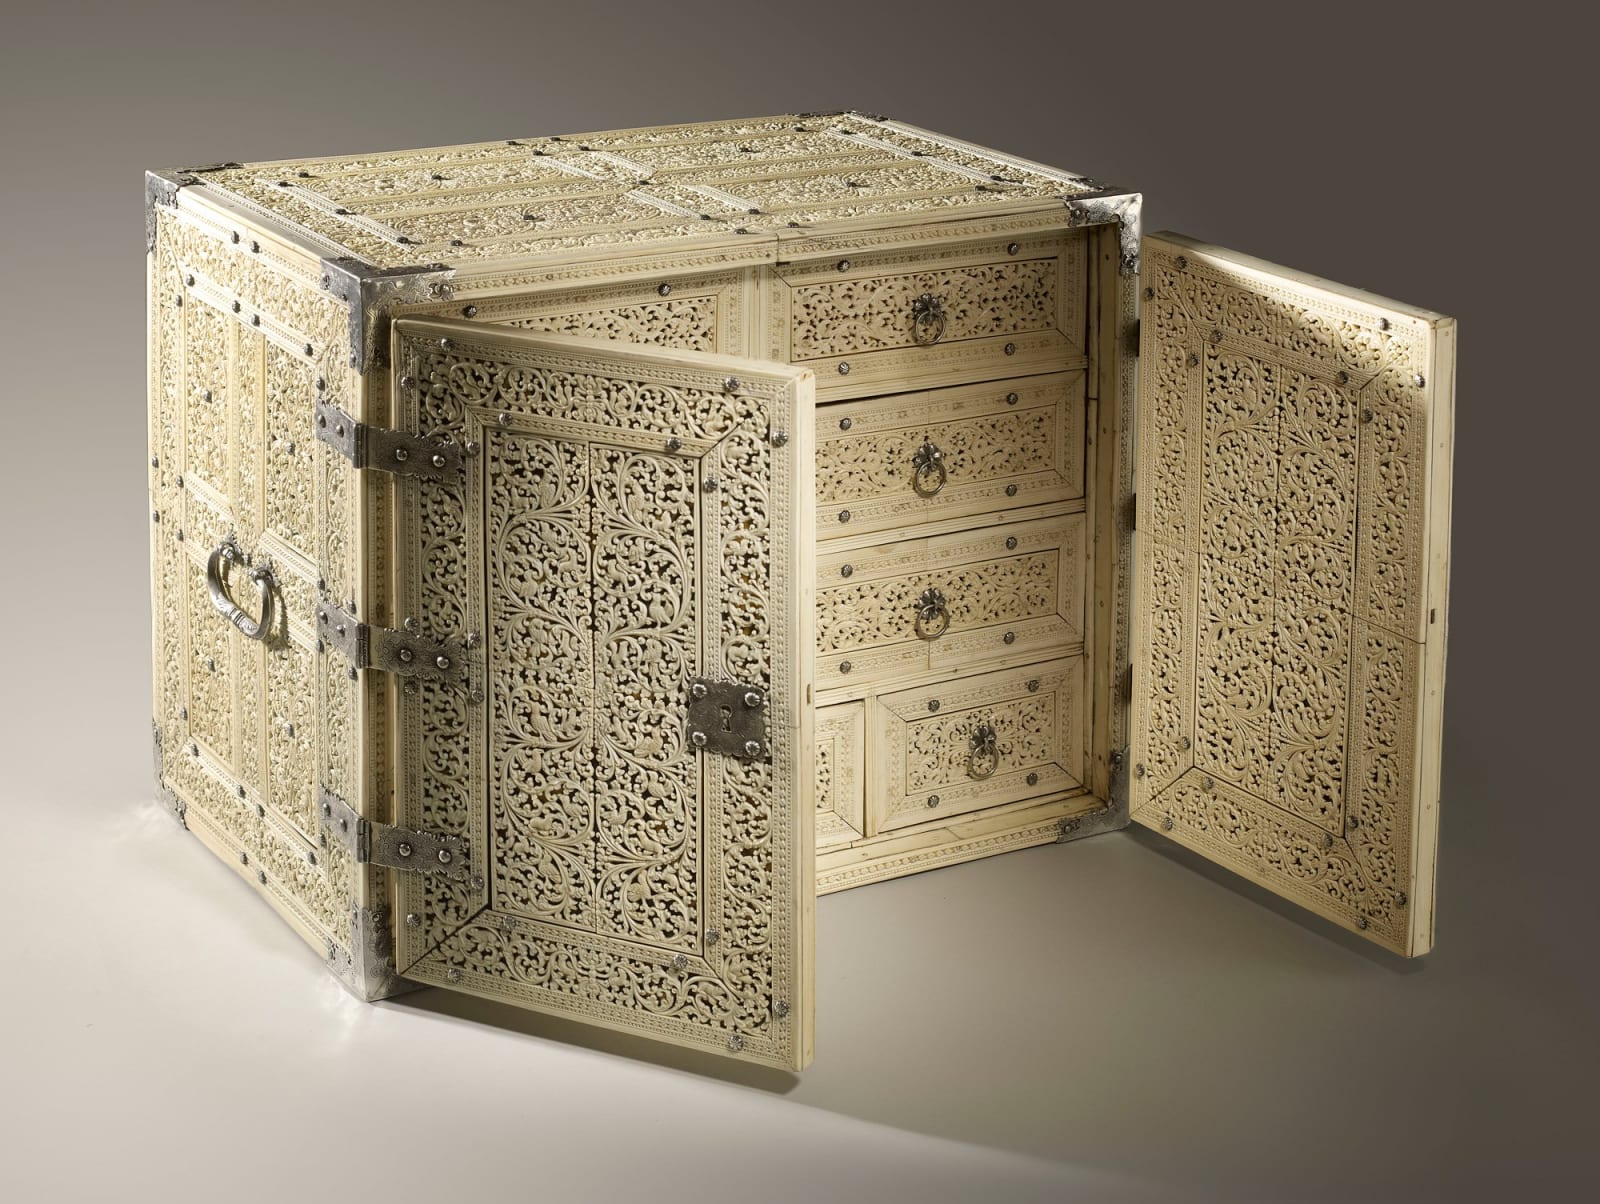 Ivory and Tortoiseshell-veneered Cabinet, Ceylon, for the Portuguese market, late 16th–17th century